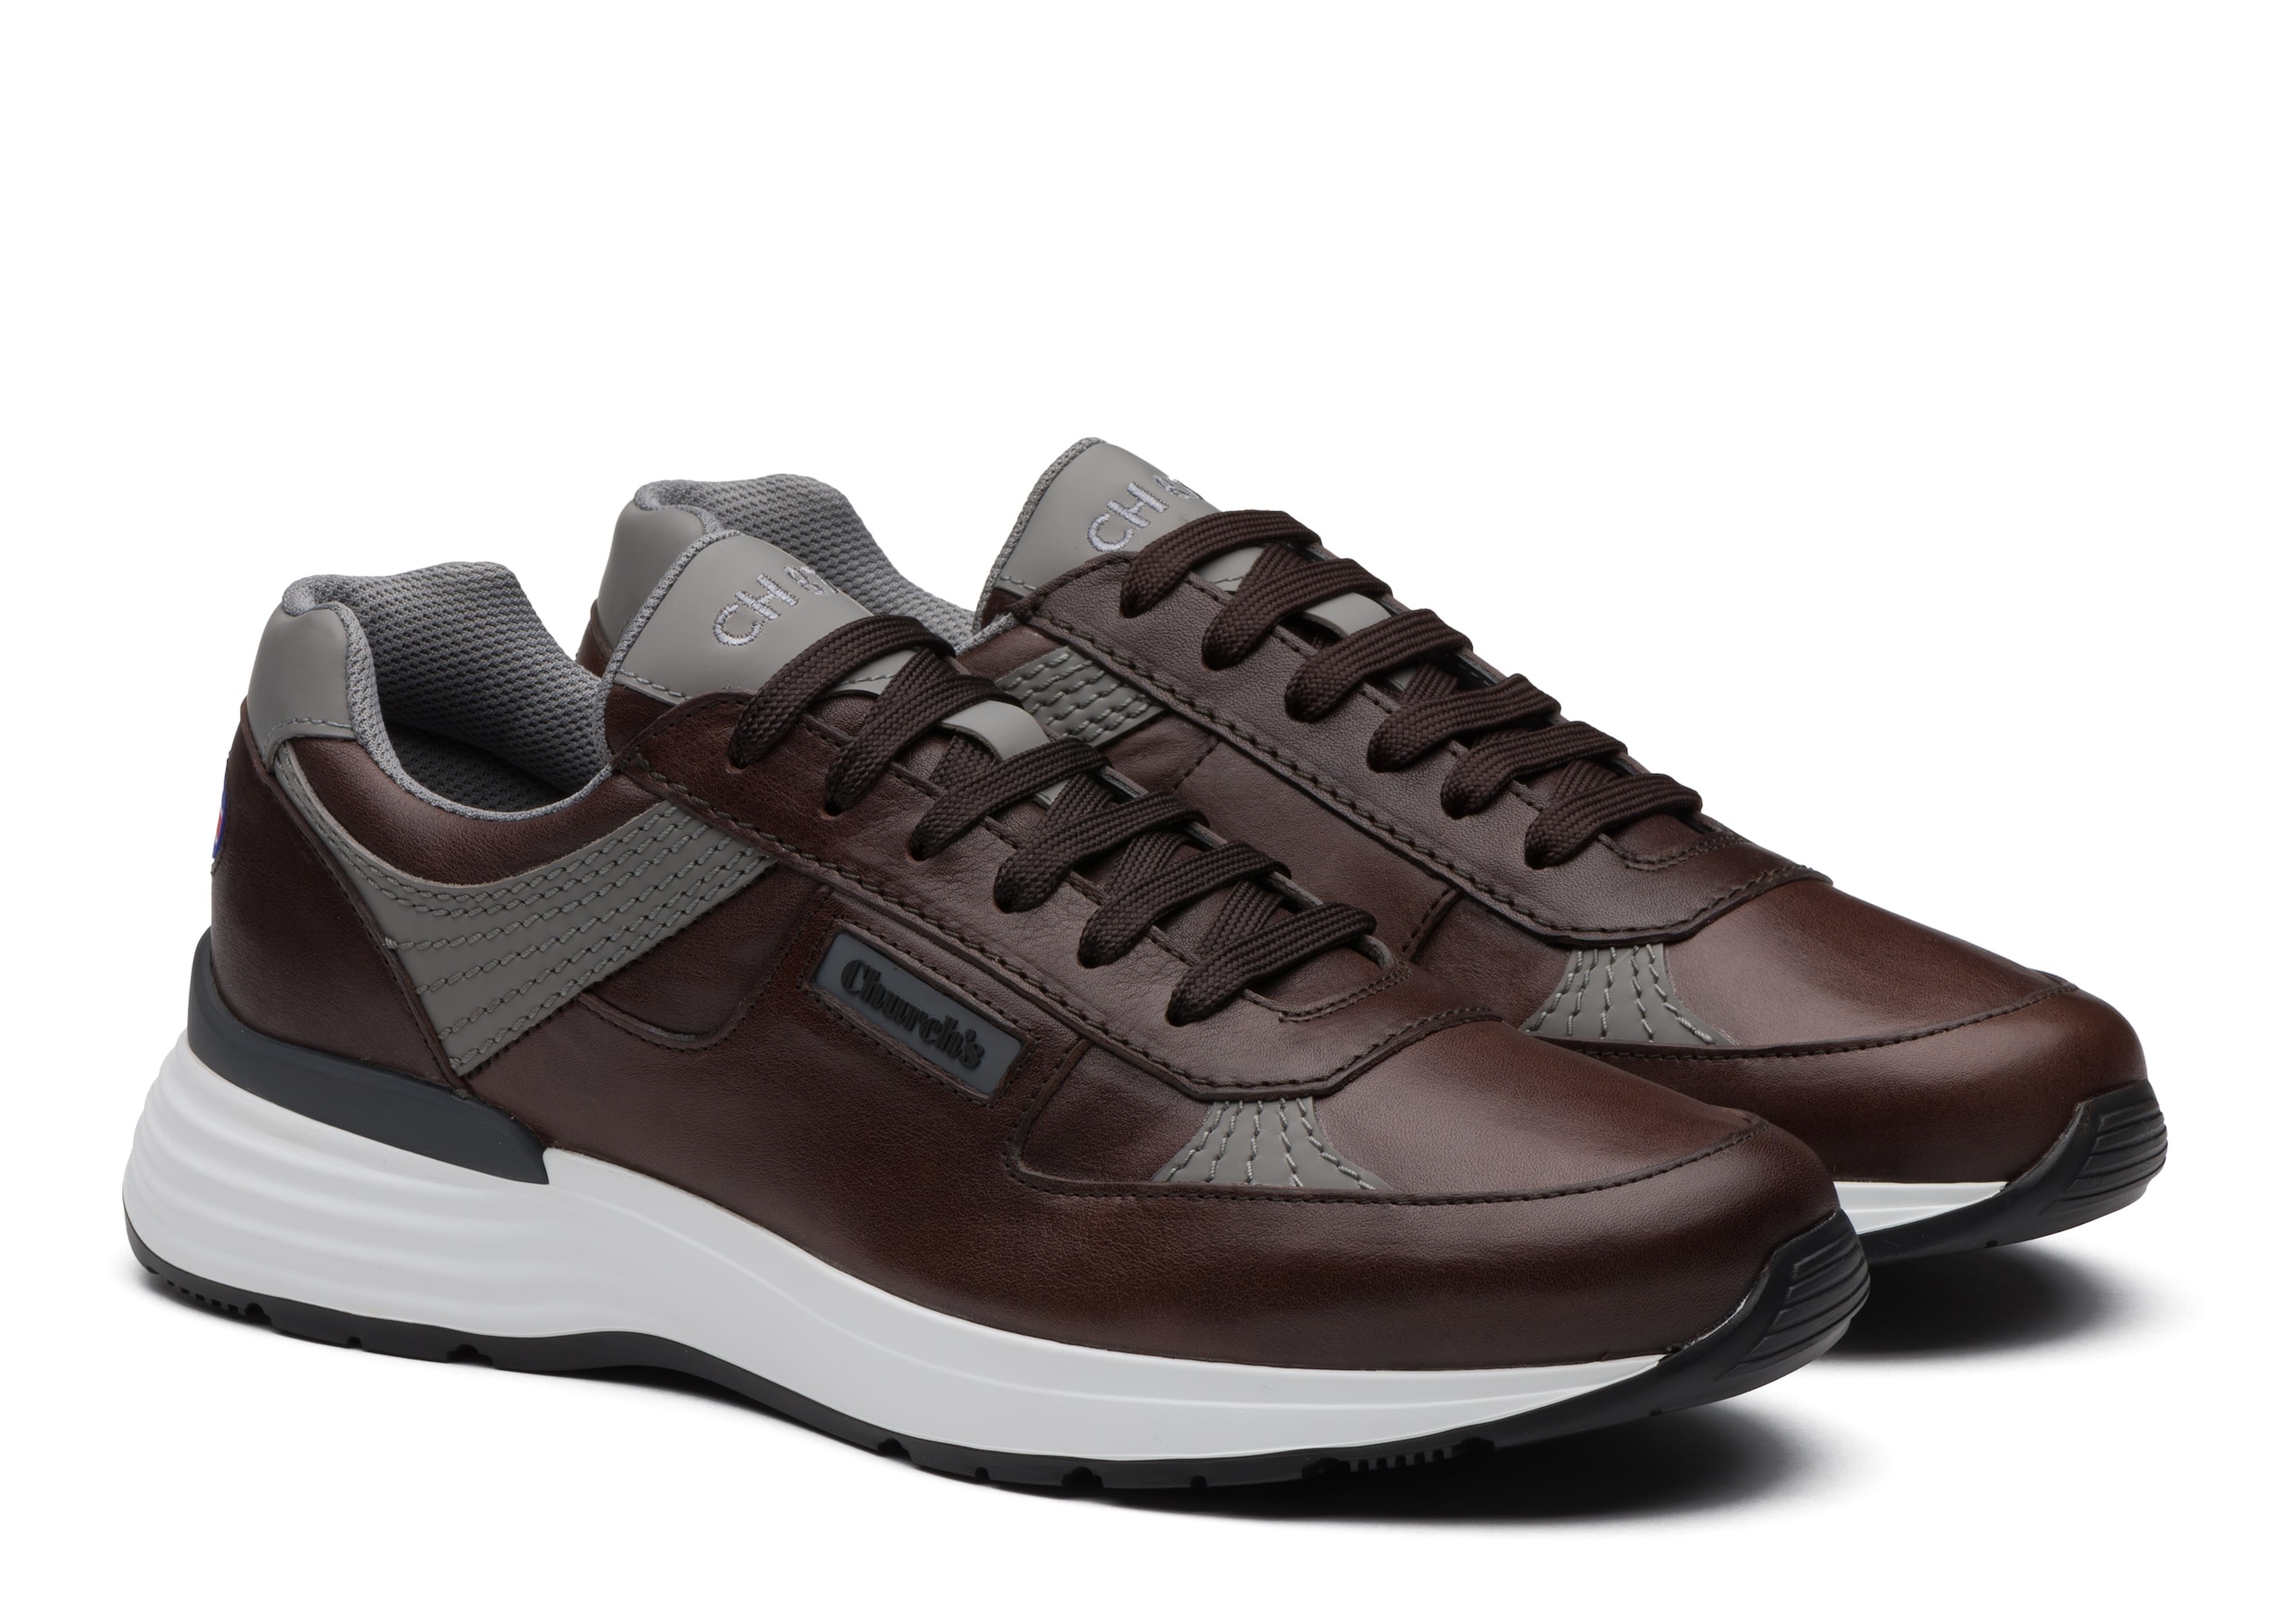 Ch873
Vintage Calf Leather Retro Sneaker Brown - 2